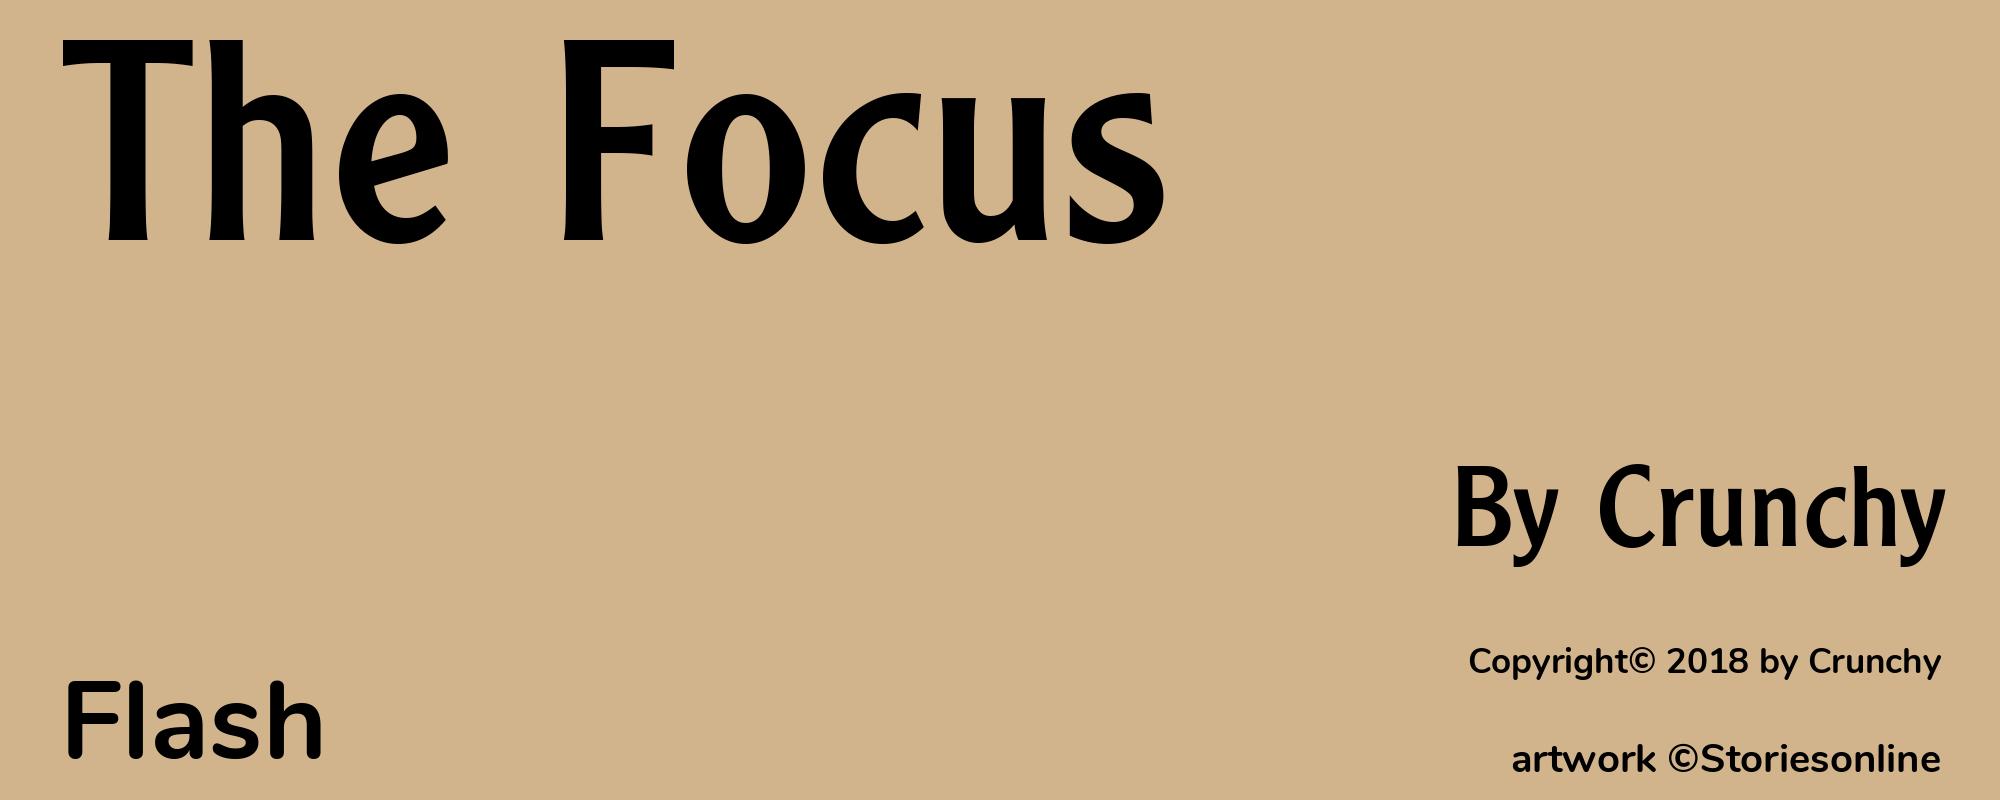 The Focus - Cover